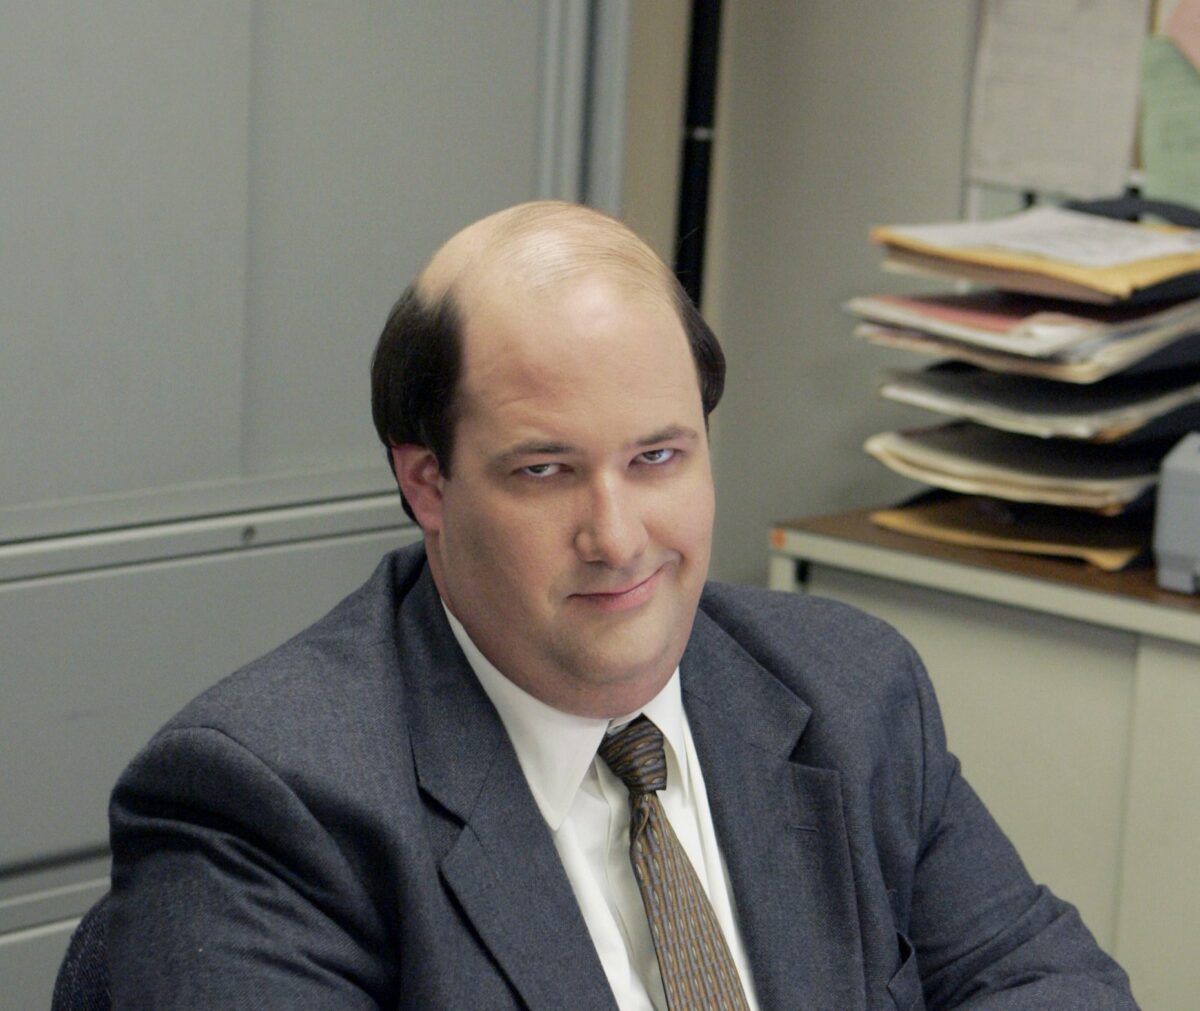 Q&A with Brian Baumgartner about playing golf with Michael Jordan, The Office, and the perfect golf cocktail